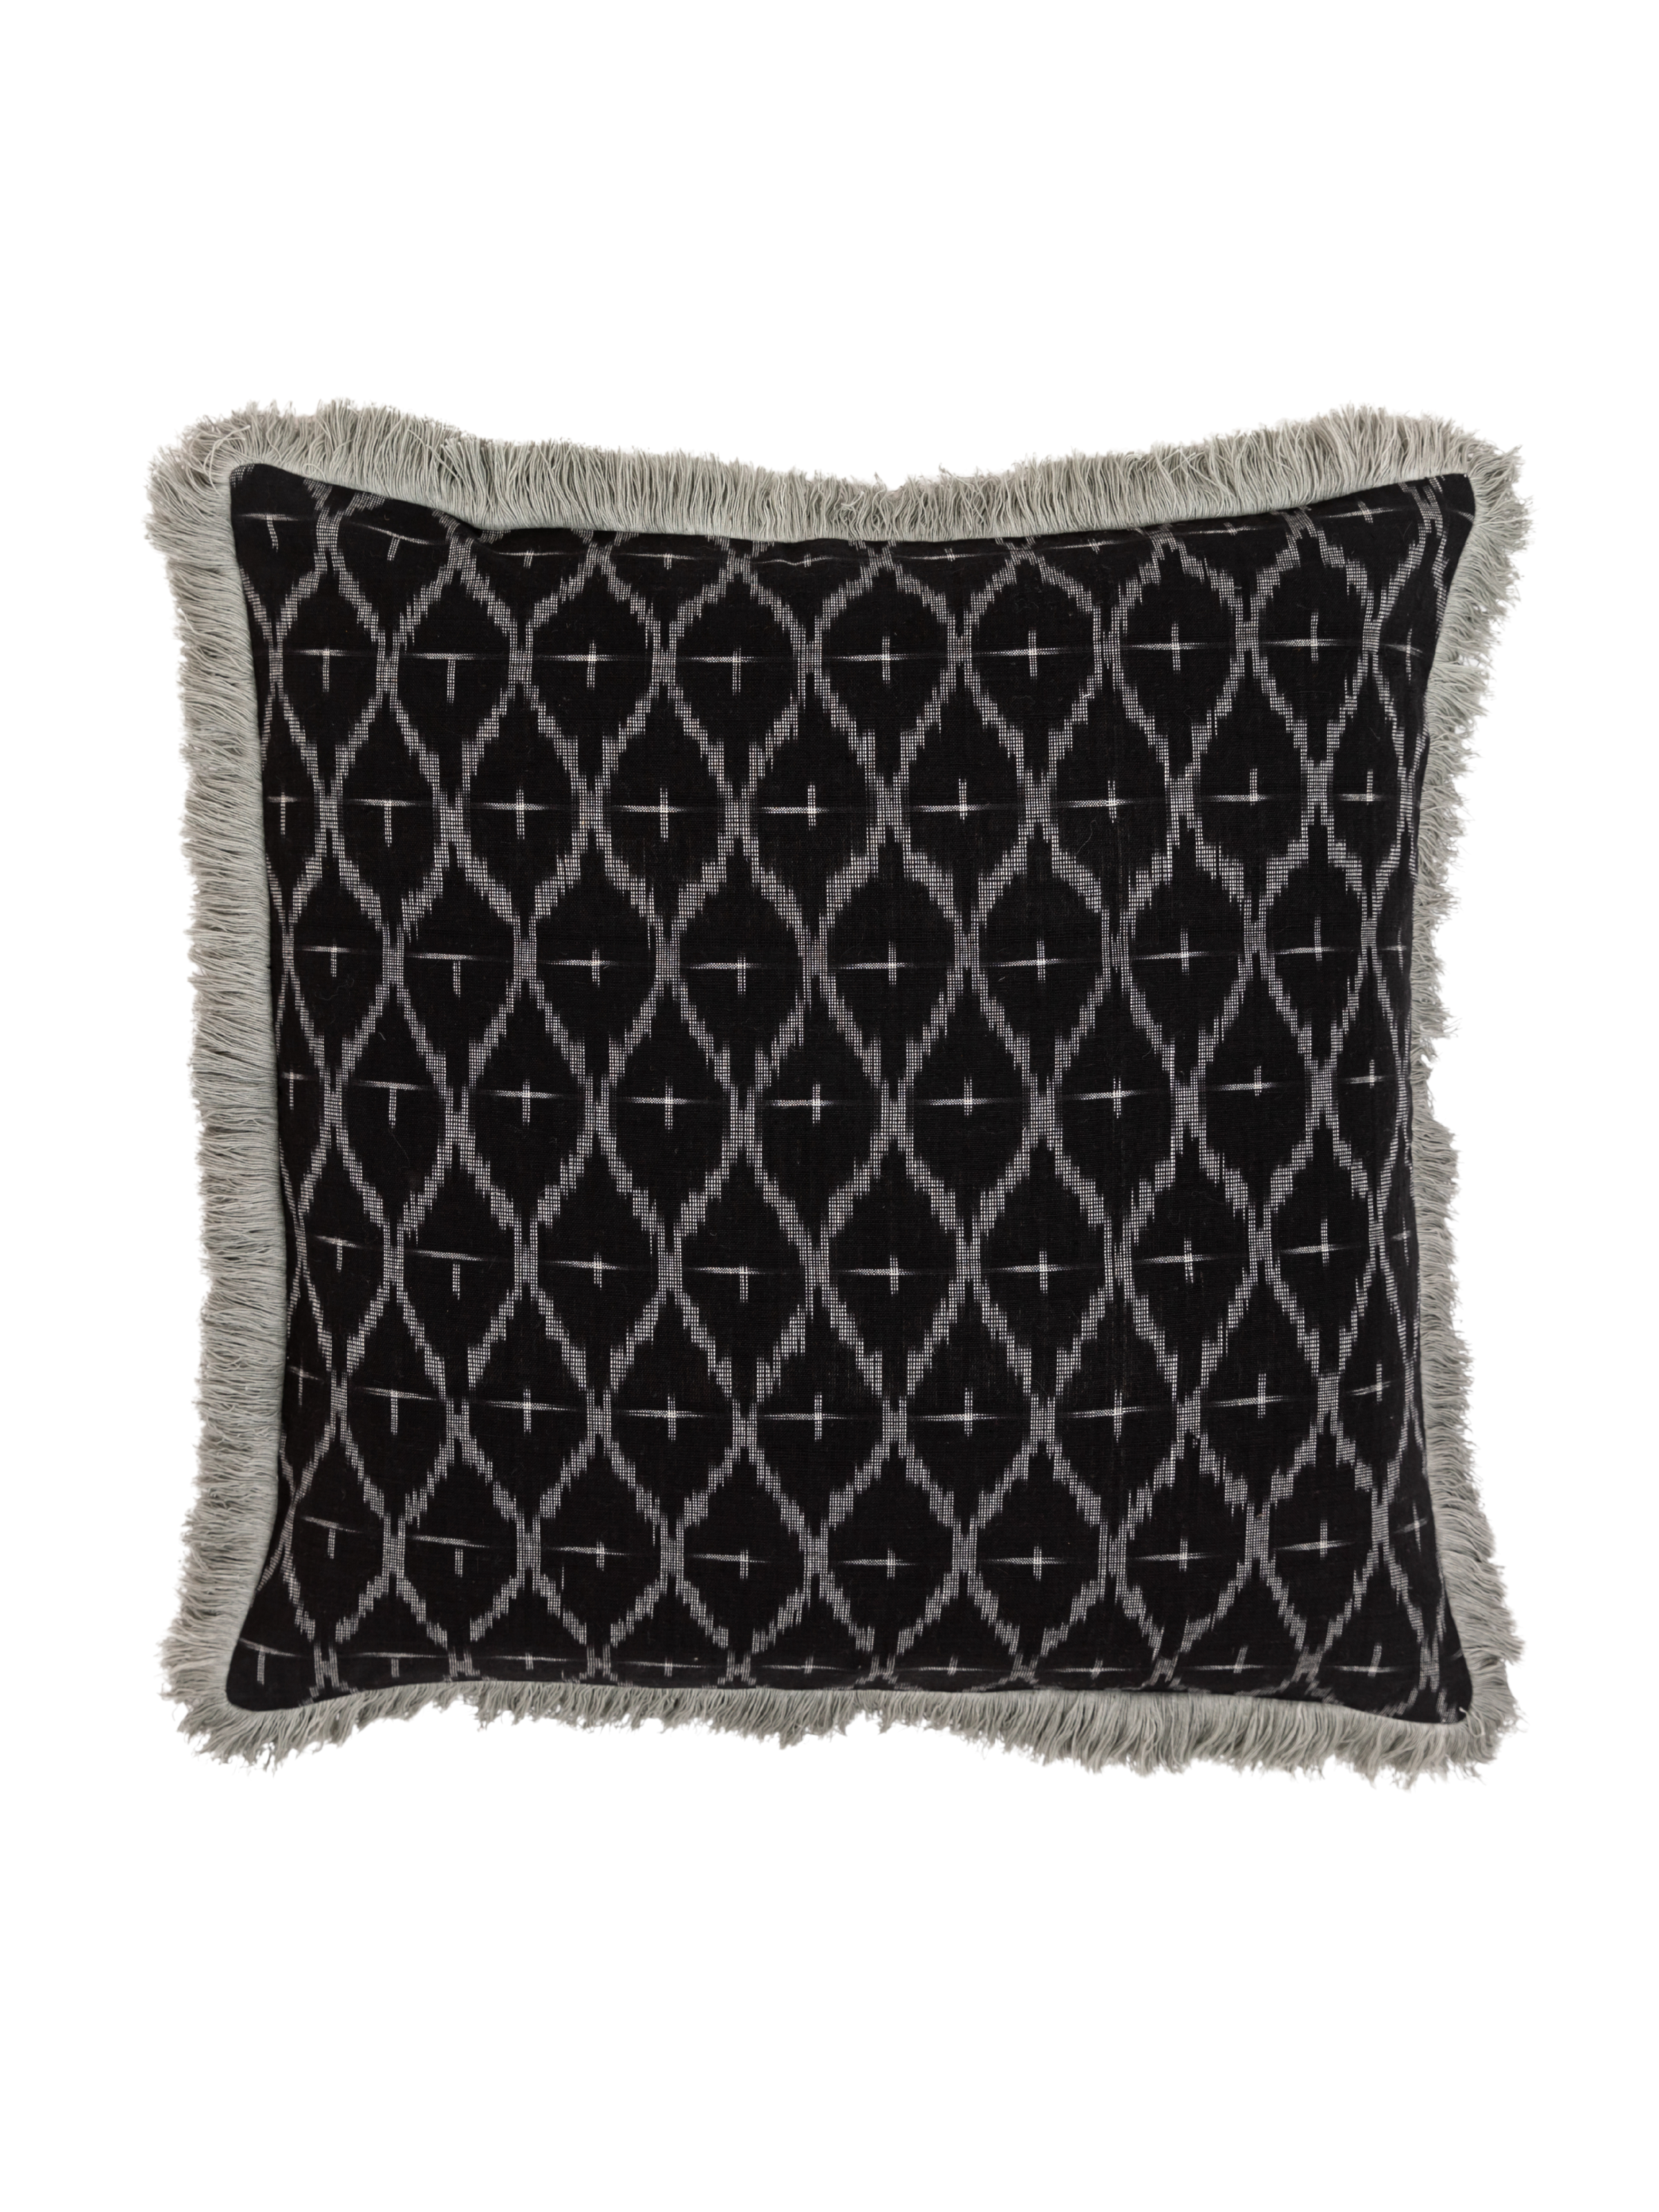 Diamond Ikat Pillow Cover With Fringe